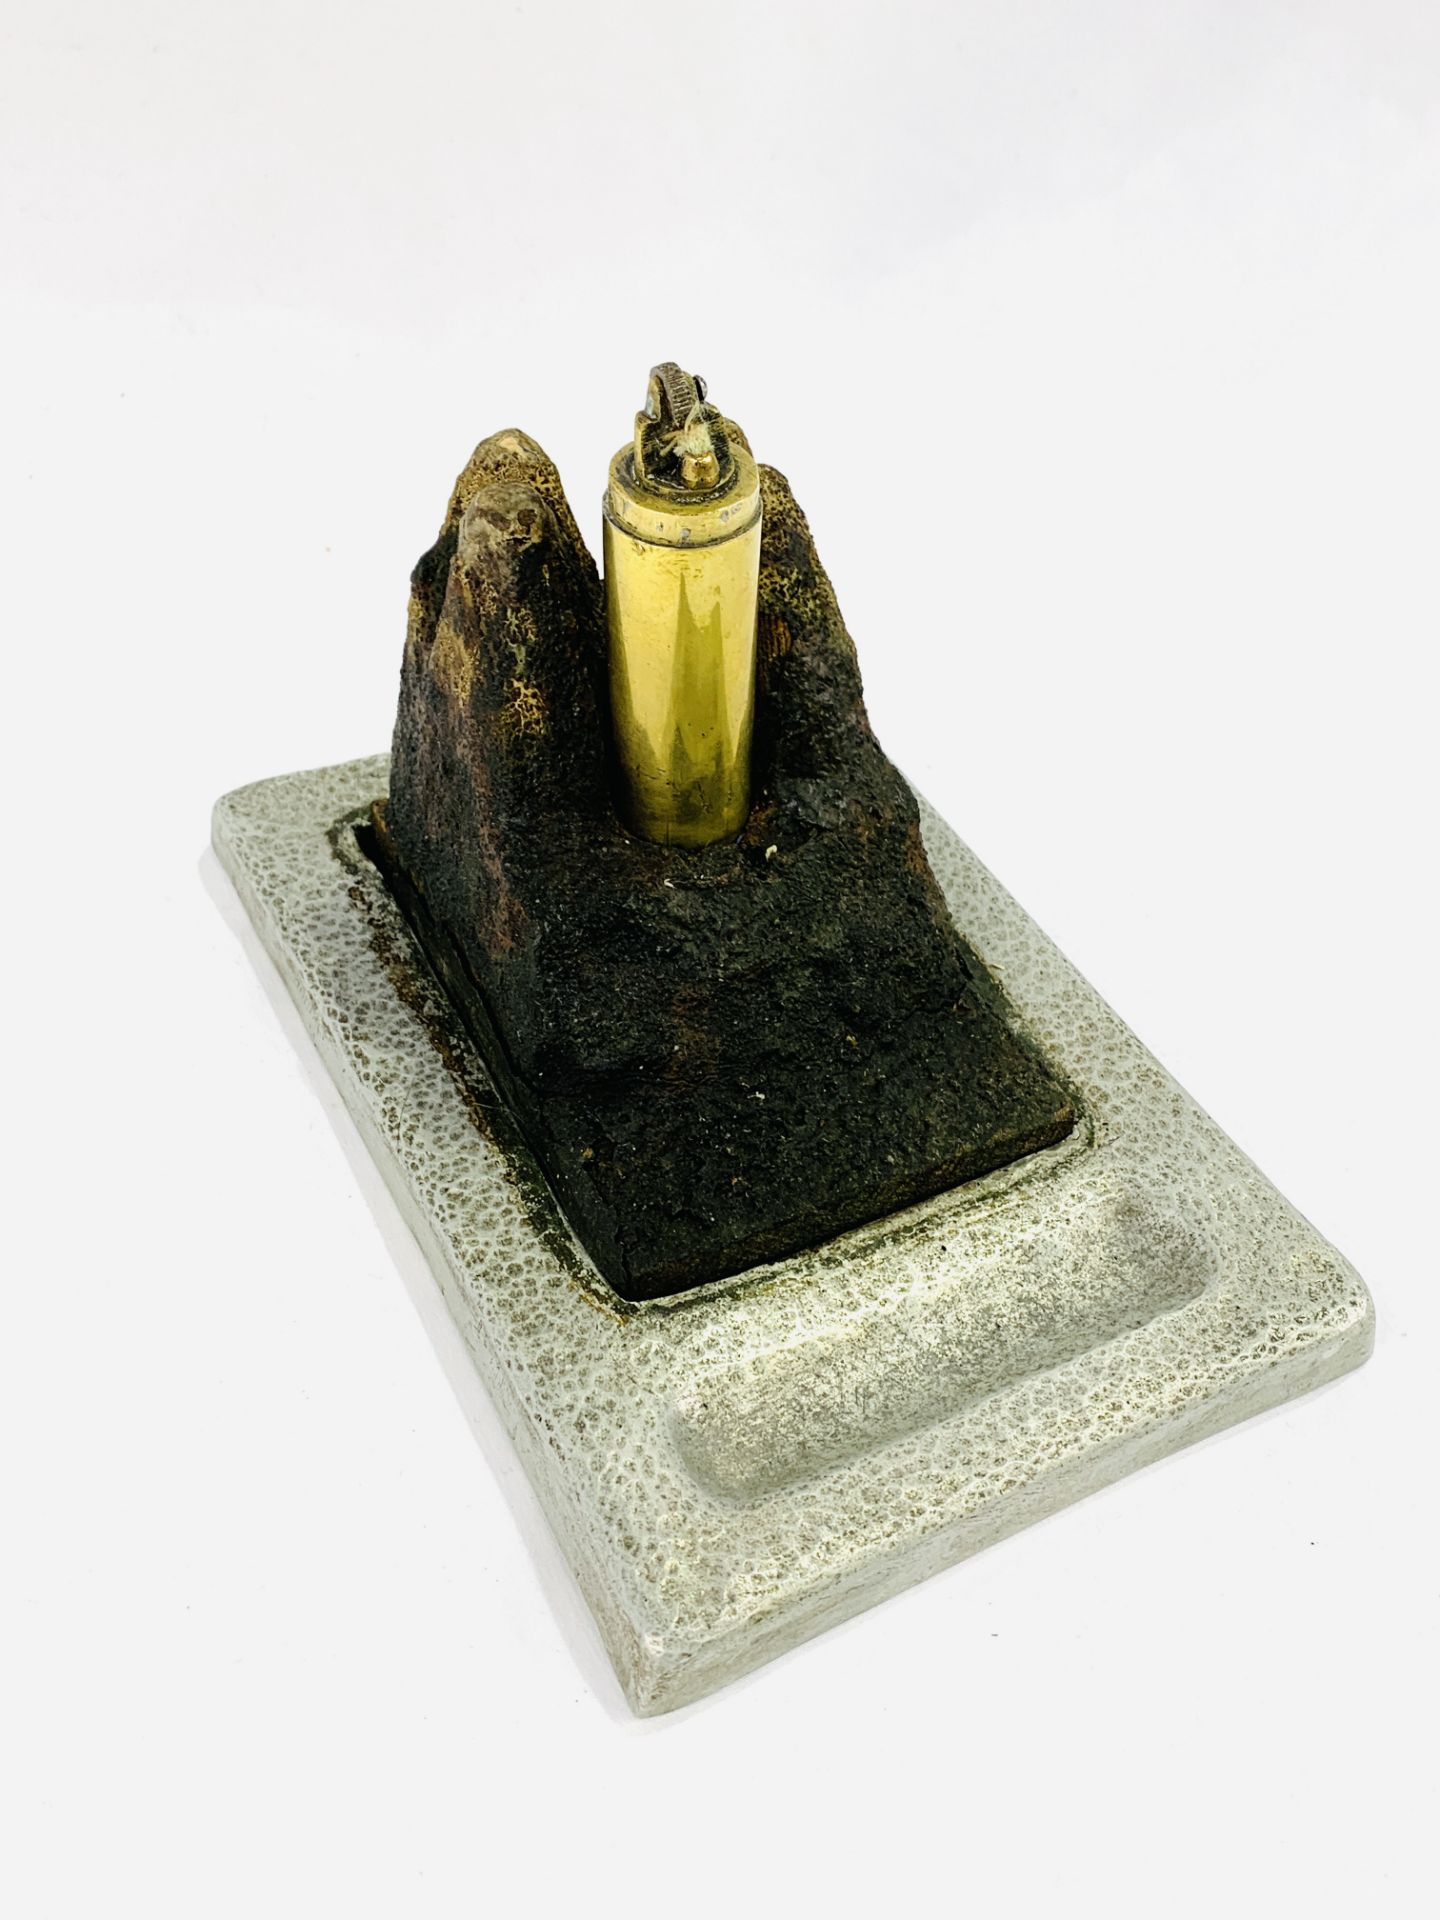 WWI trench art 20mm cannon shell petrol lighter - Image 2 of 2